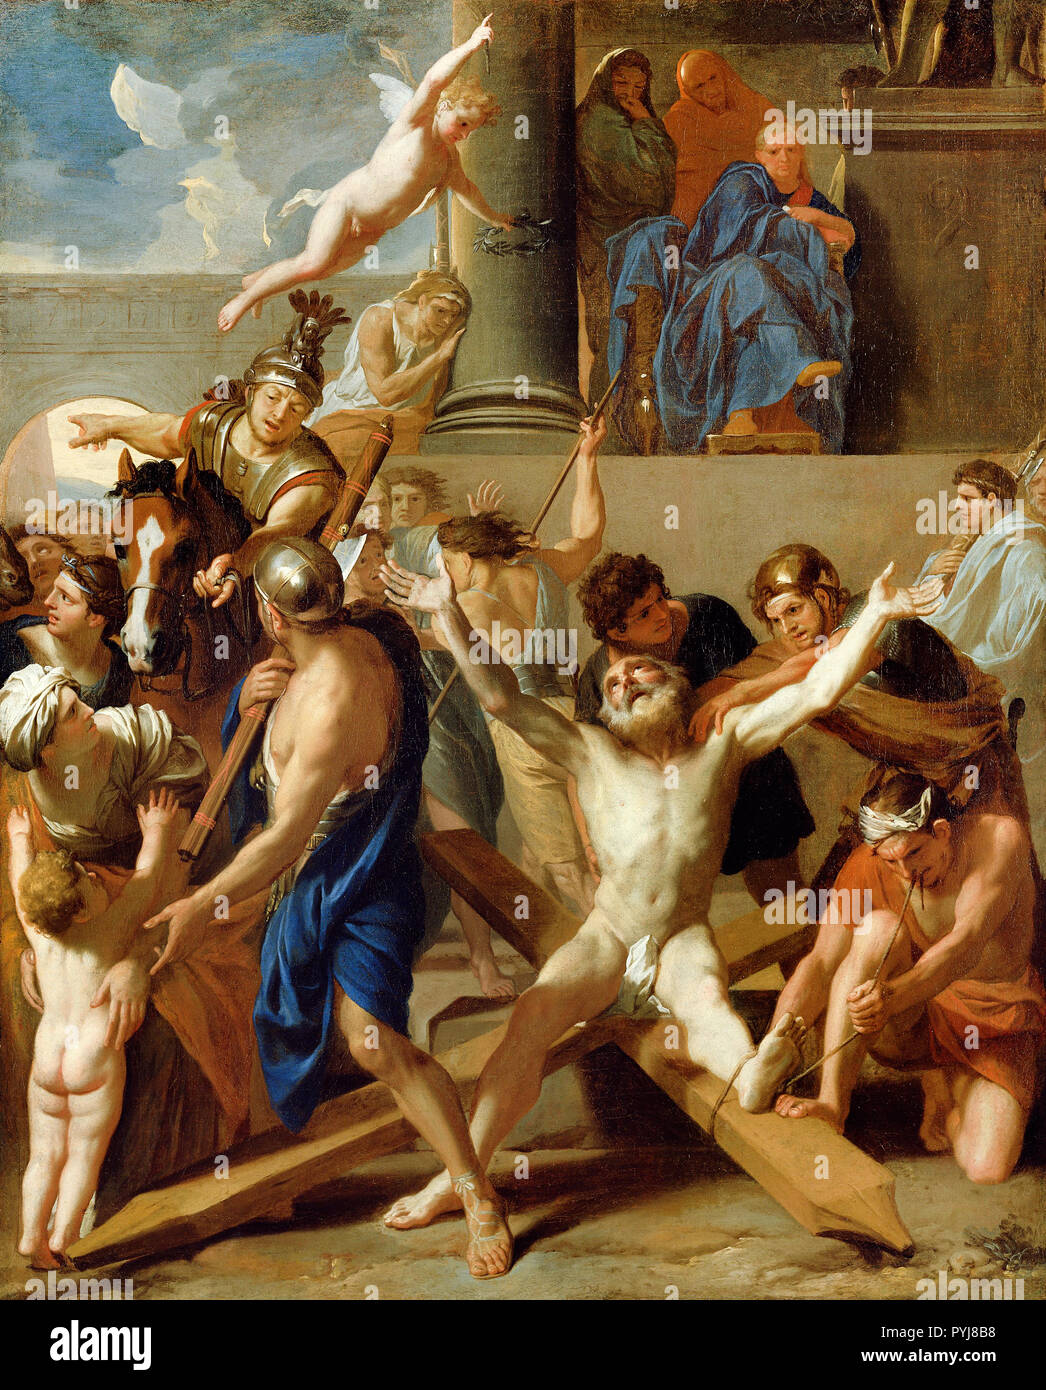 Charles Le Brun, The Martyrdom of St. Andrew, Circa 1646-1647 Oil on canvas, The J. Paul Getty Museum, Los Angeles, USA. Stock Photo